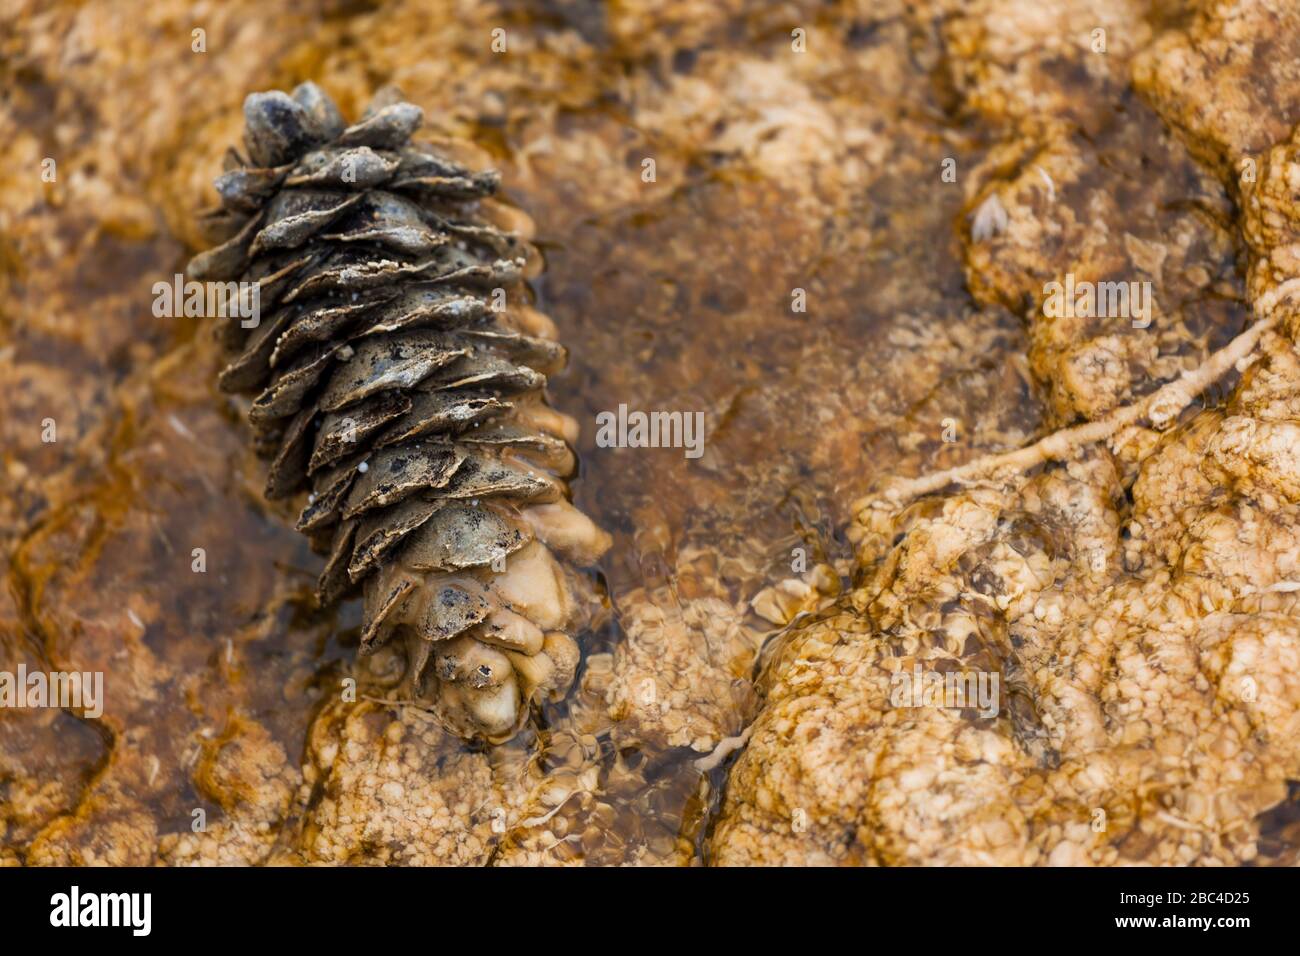 A pine cone resting in a shallow pool of geothermal mineral water at Mammoth Hot Springs in Yellowstone National Park, Wyoming. Stock Photo